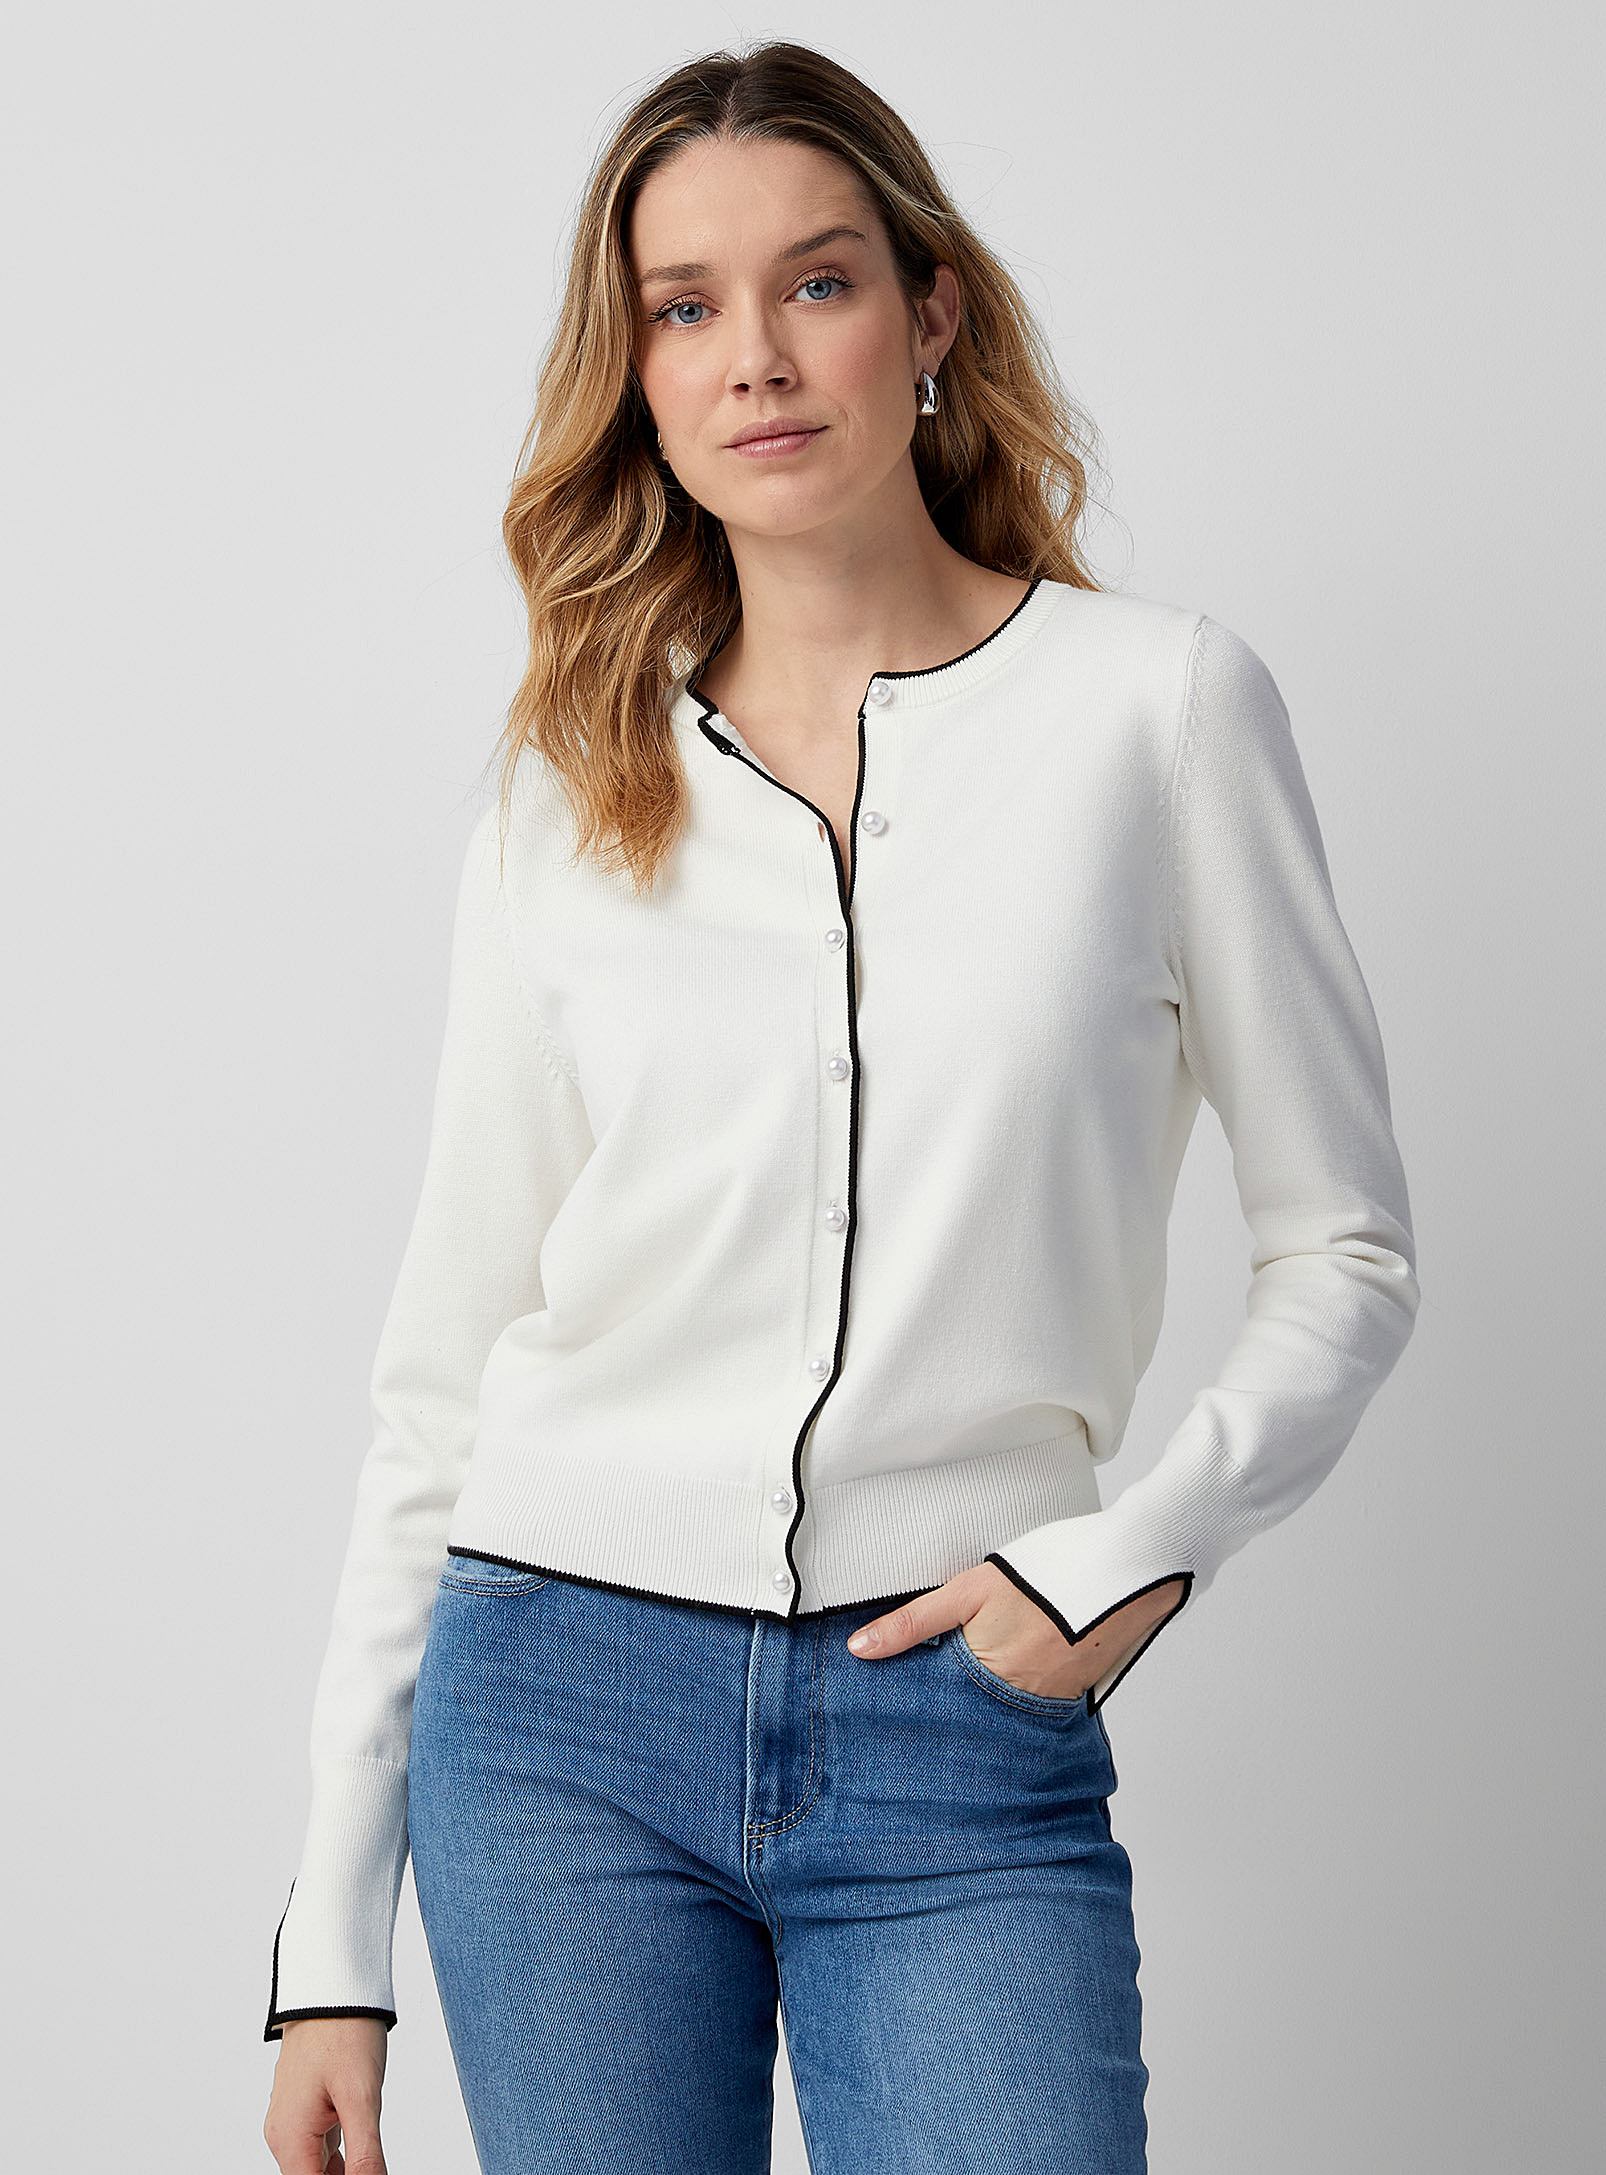 Contemporaine Pearl Buttons Contrasting Touch Cardigan In Ivory White